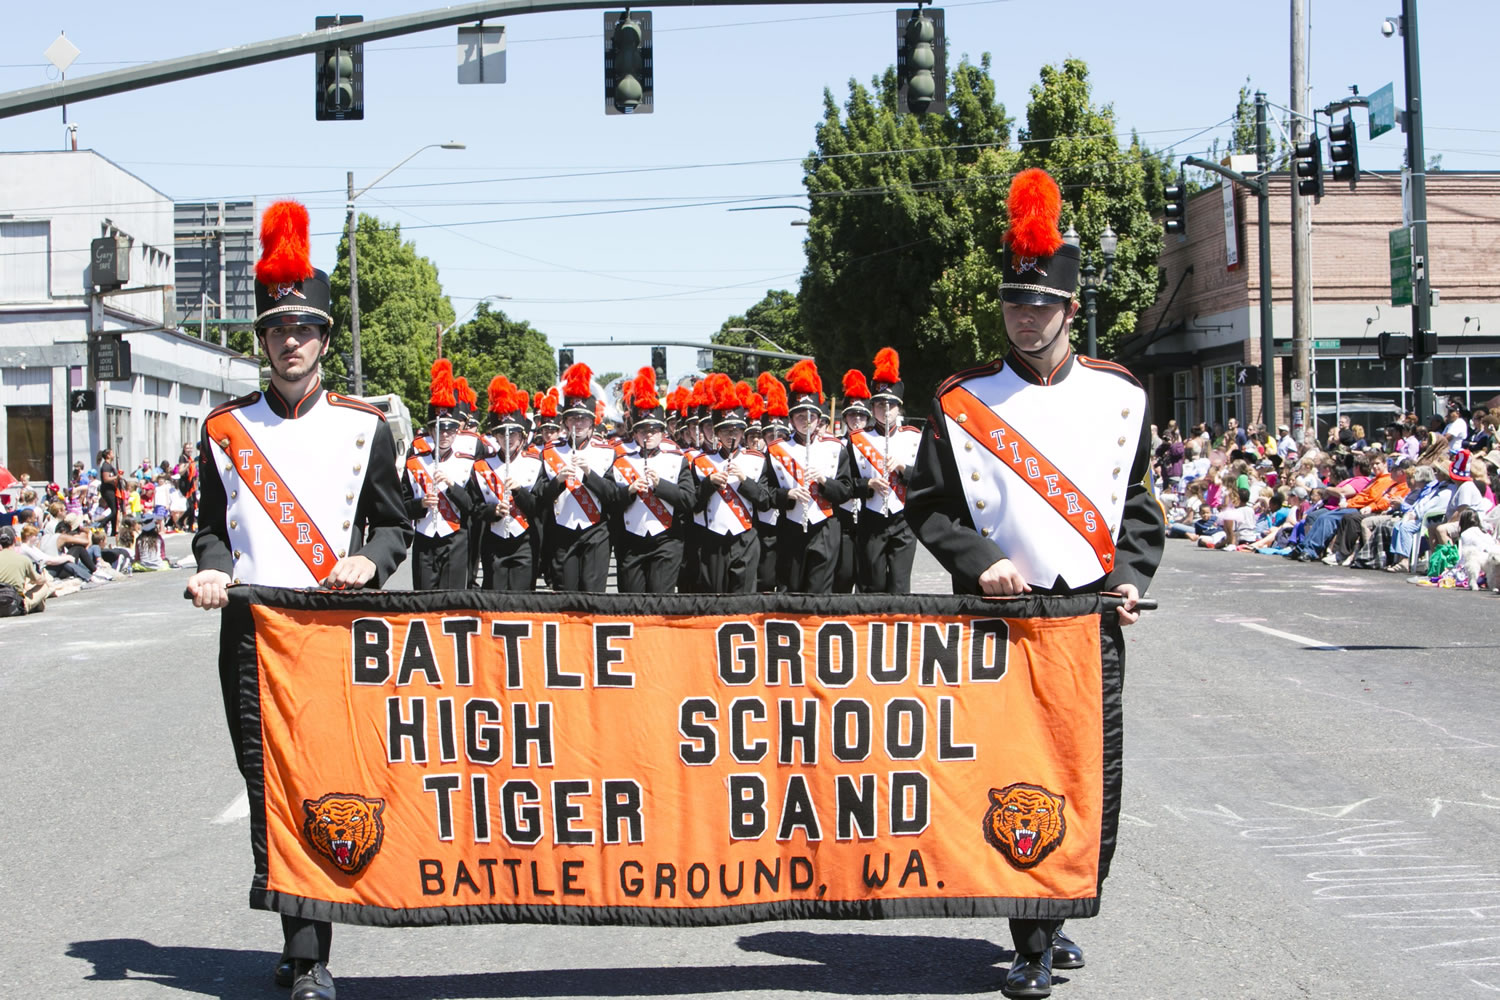 The Battle Ground High School Marching Band won first place among out-of-state bands of 99 members or less in the Grand Floral Parade in Portland on Saturday.